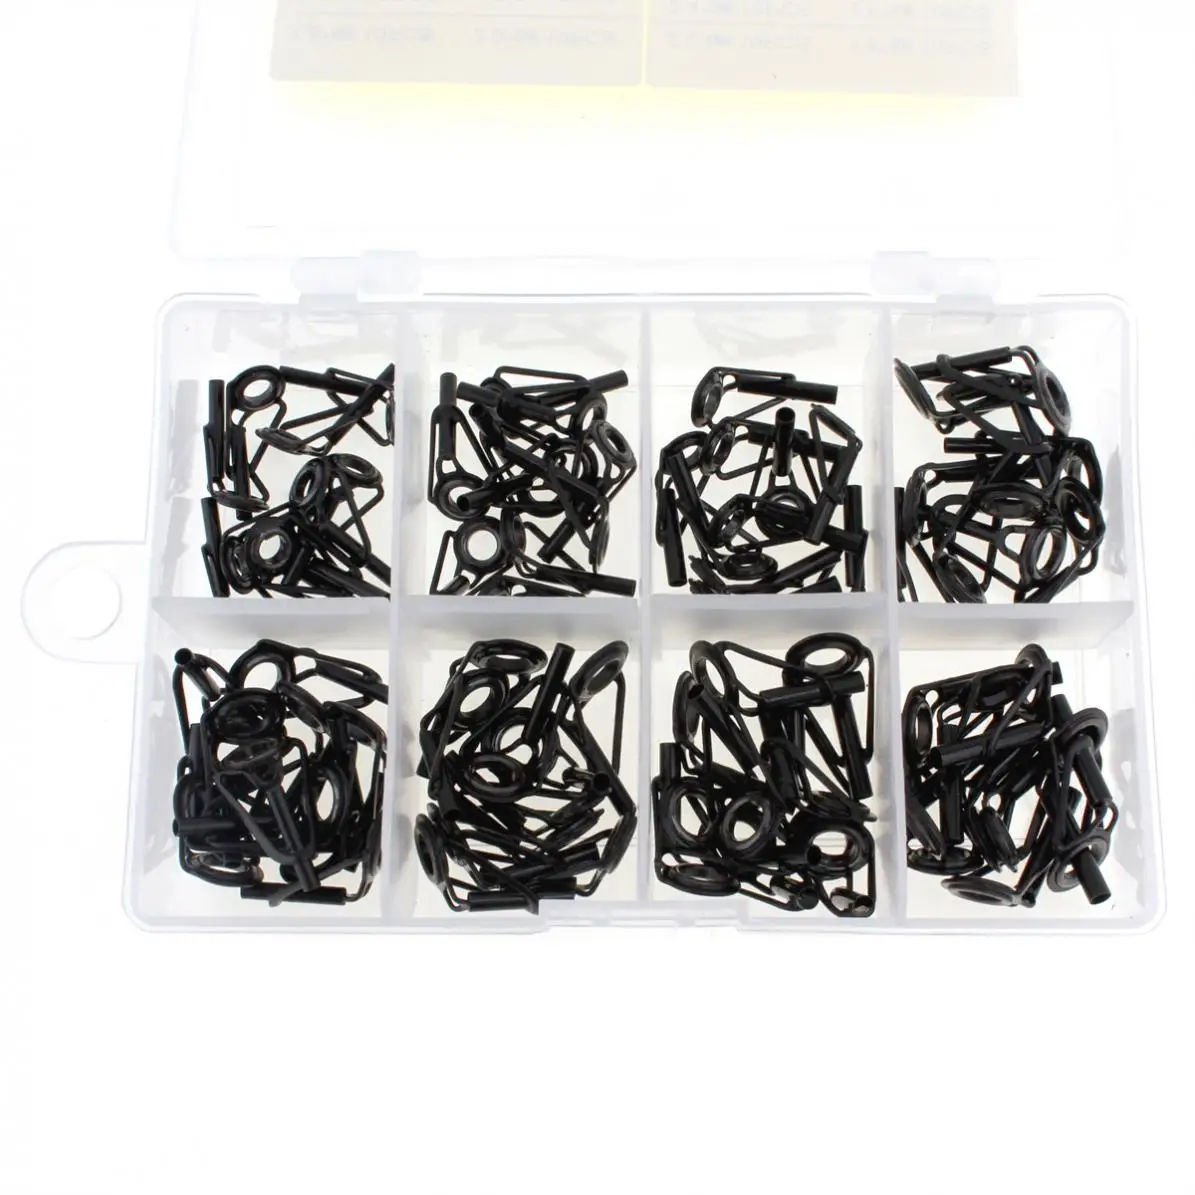 

80Pcs/Lot 8 Sizes Replaceable Fishing Rod Guides Ceramics & Stainless Steel Circle Fishing Rod Accessories Repair Tool with Box